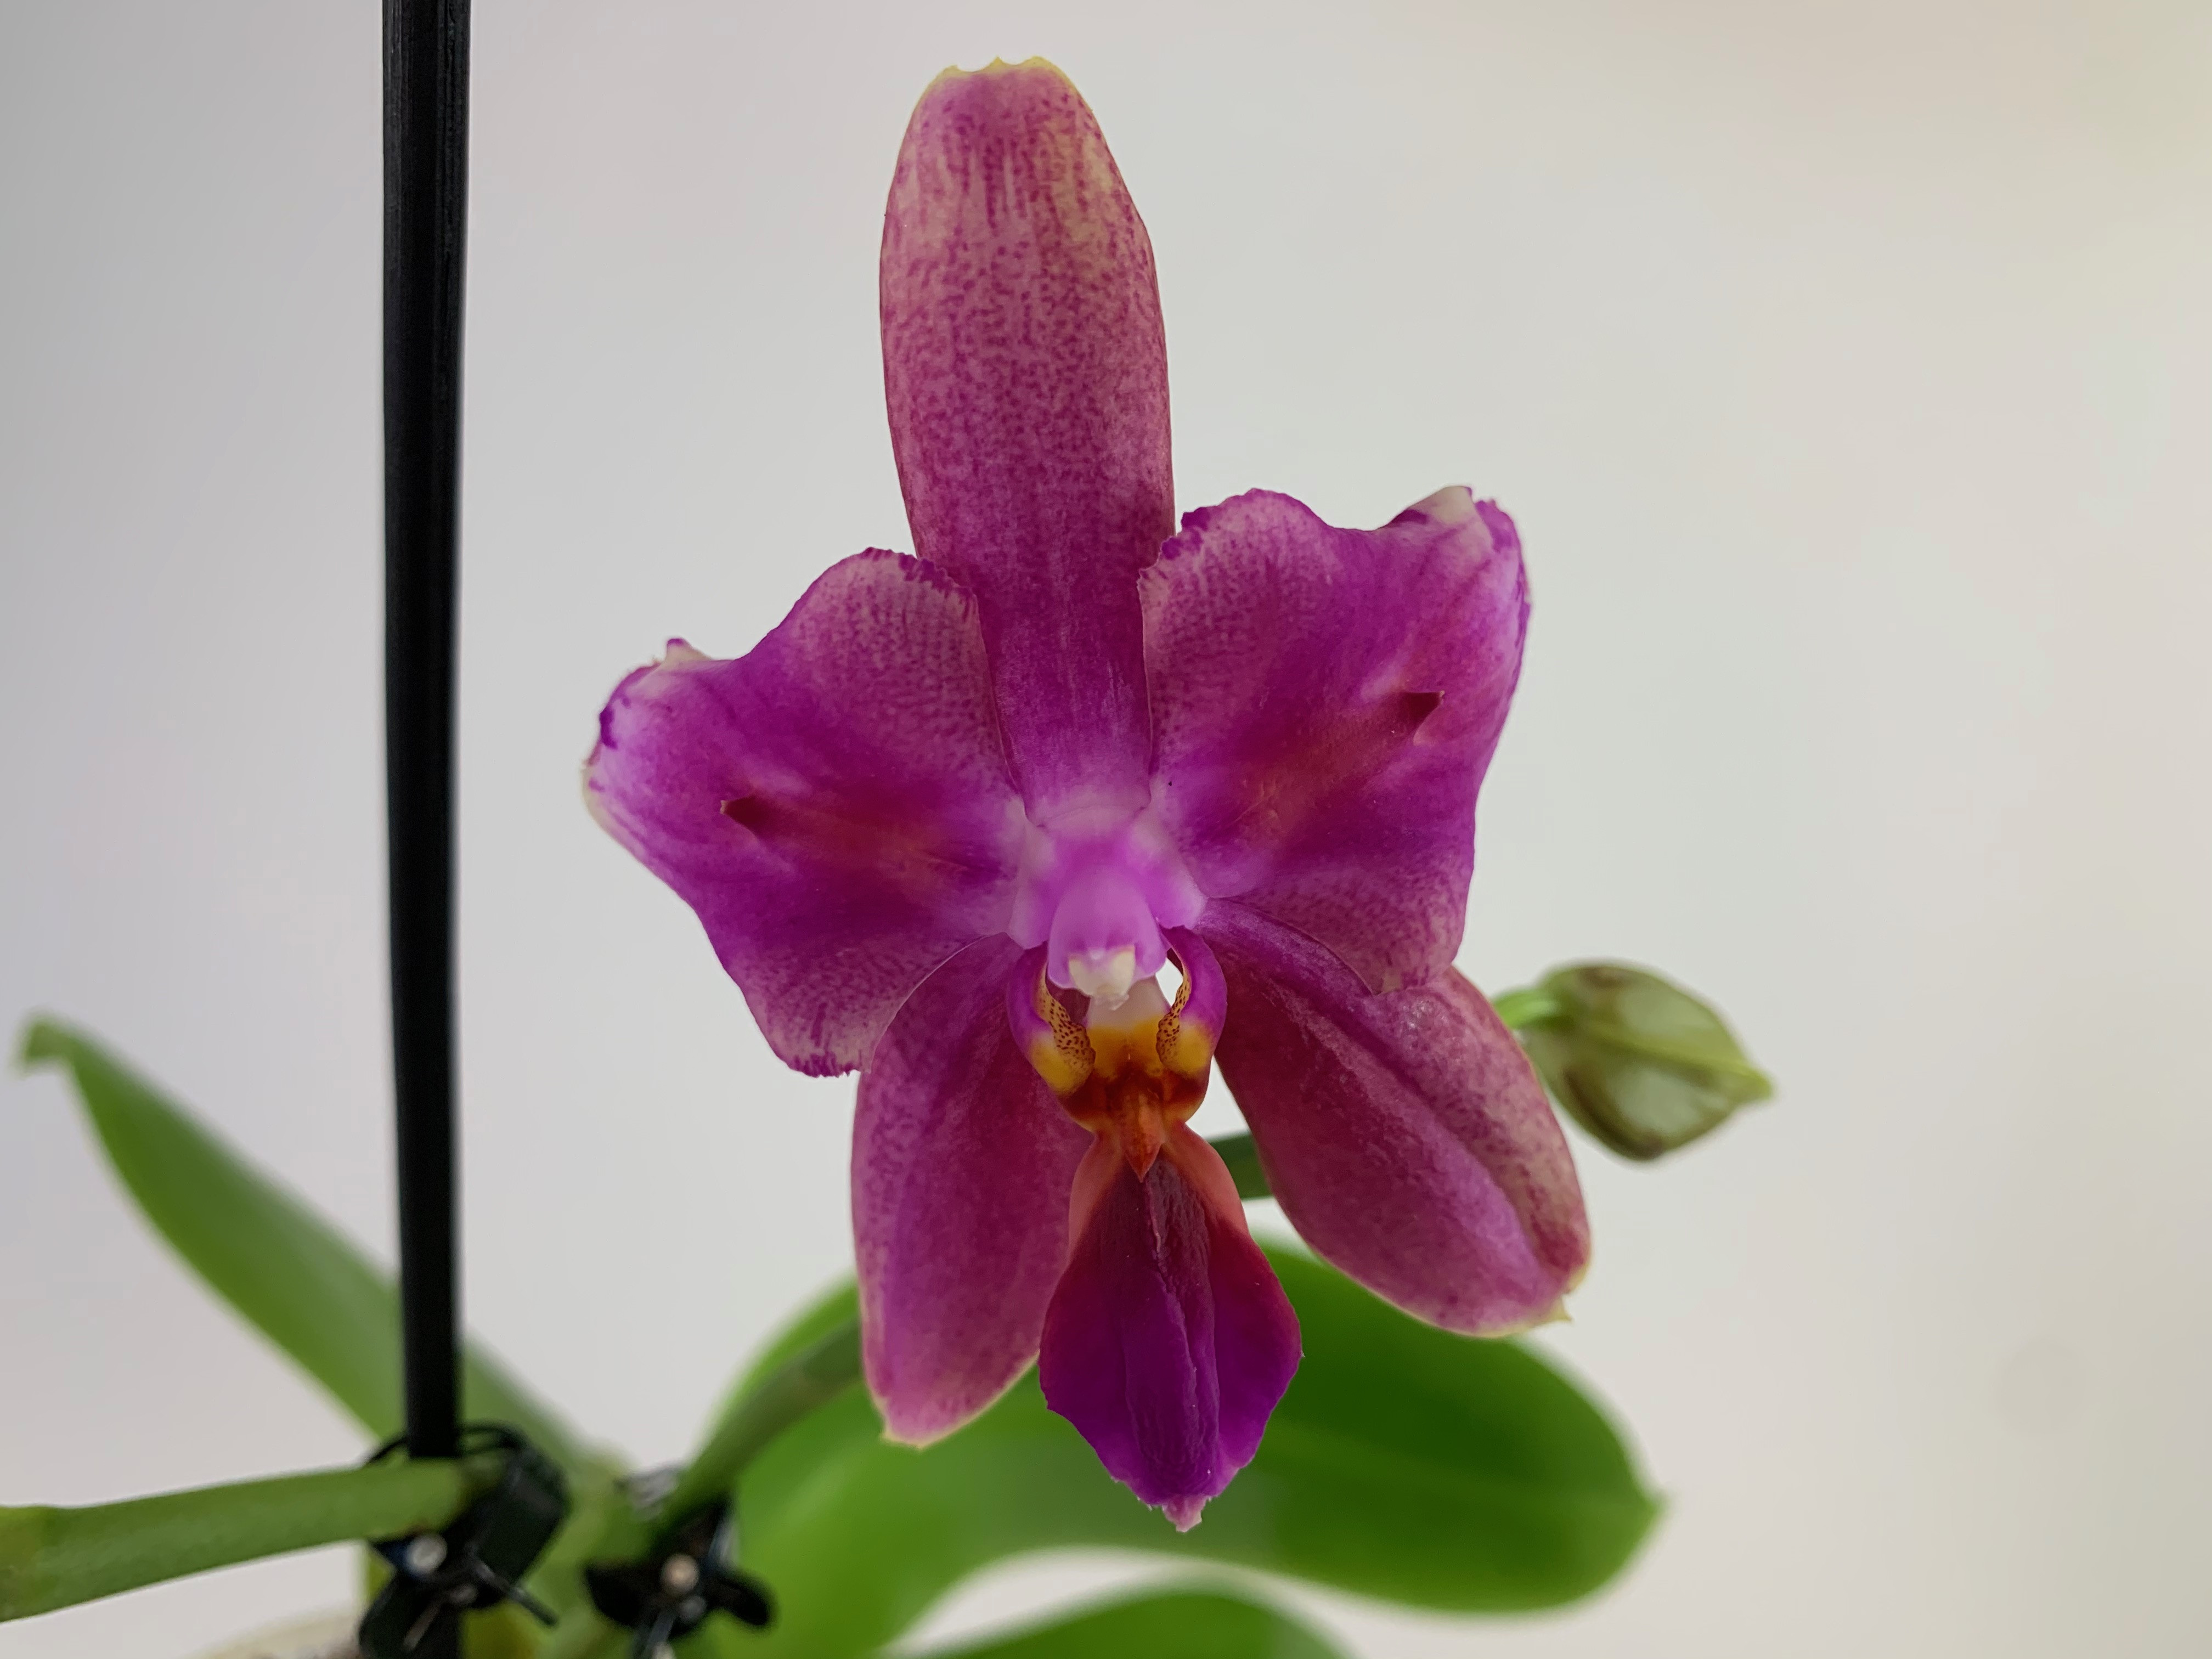 Phalaenopsis Liodoro (pelorisch) | Orchideen-Wichmann.de - Highest  horticultural quality and experience since 1897